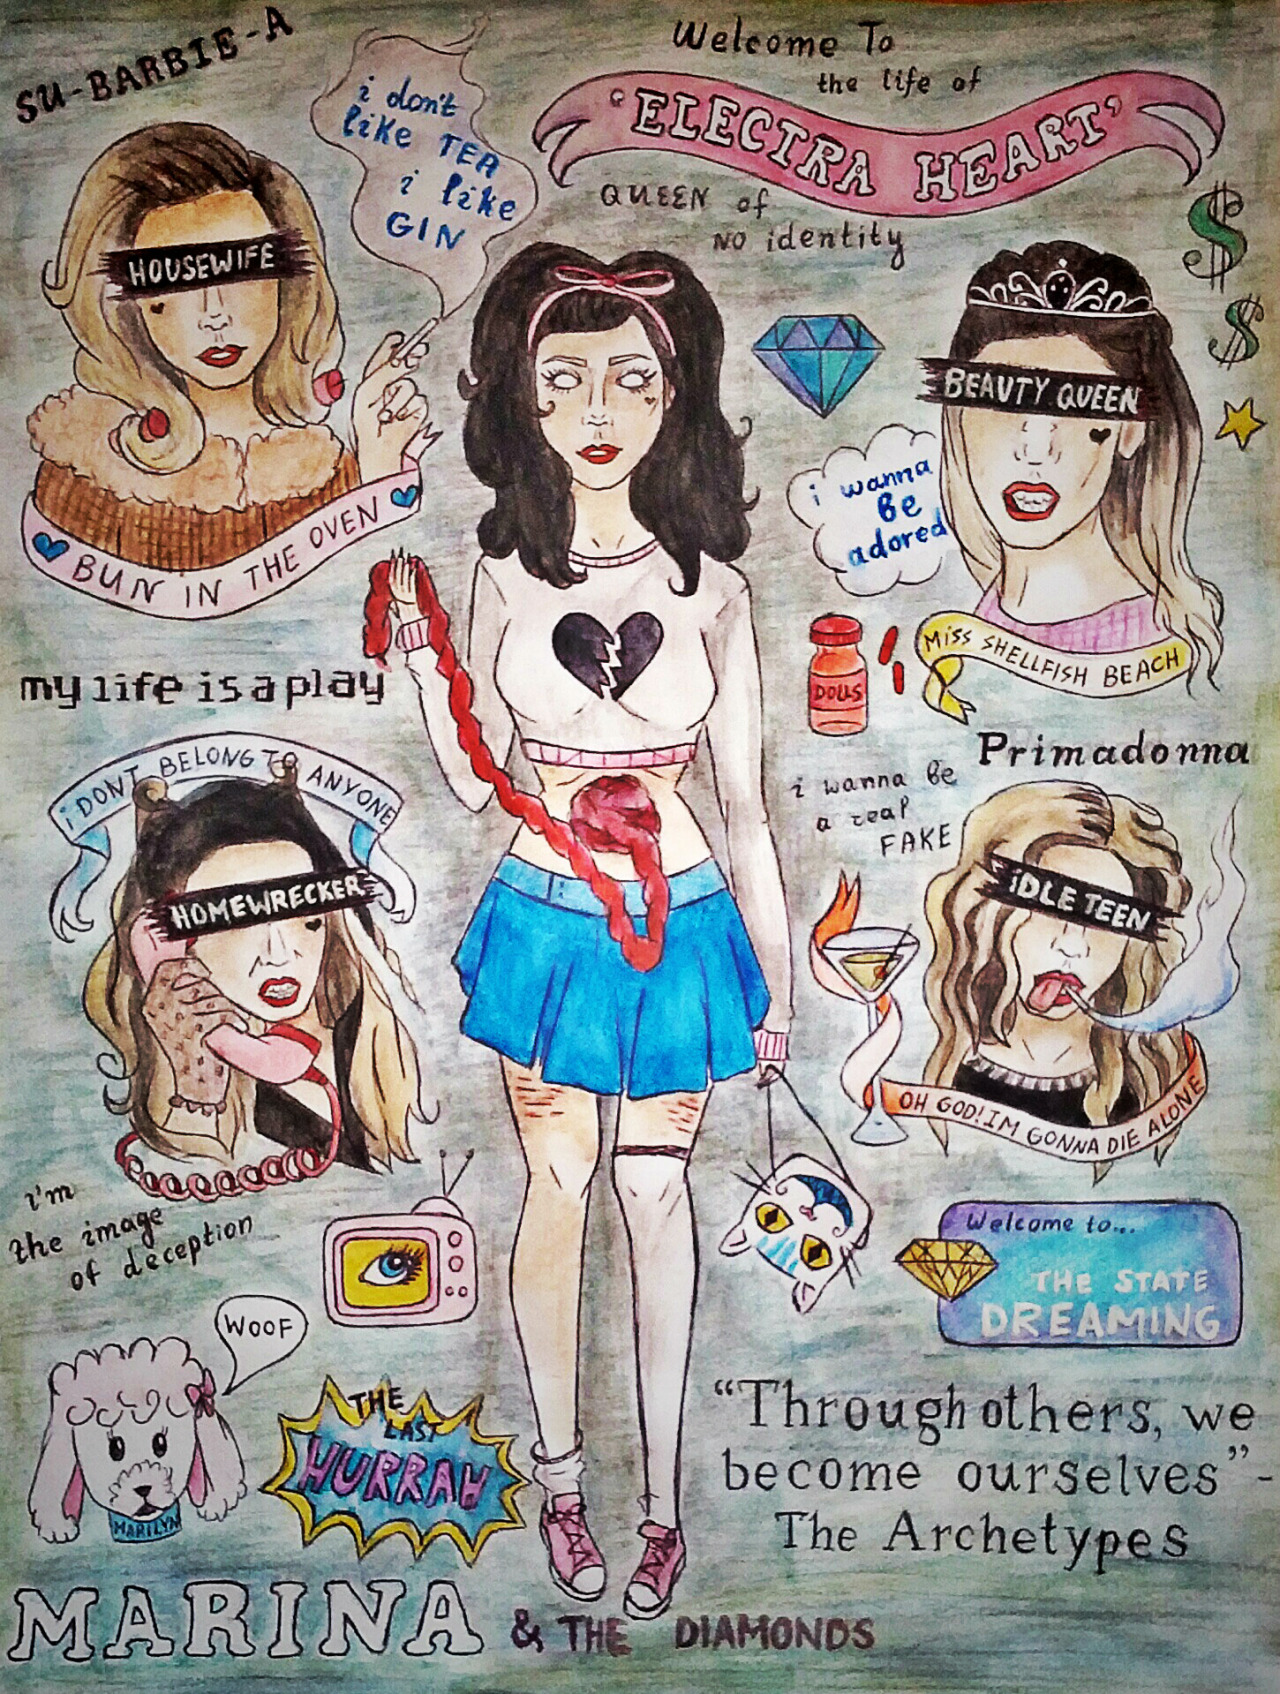  ”Electra Heart: The Archetypes”♡ READY FOR THE LAST HURRAH♡ 